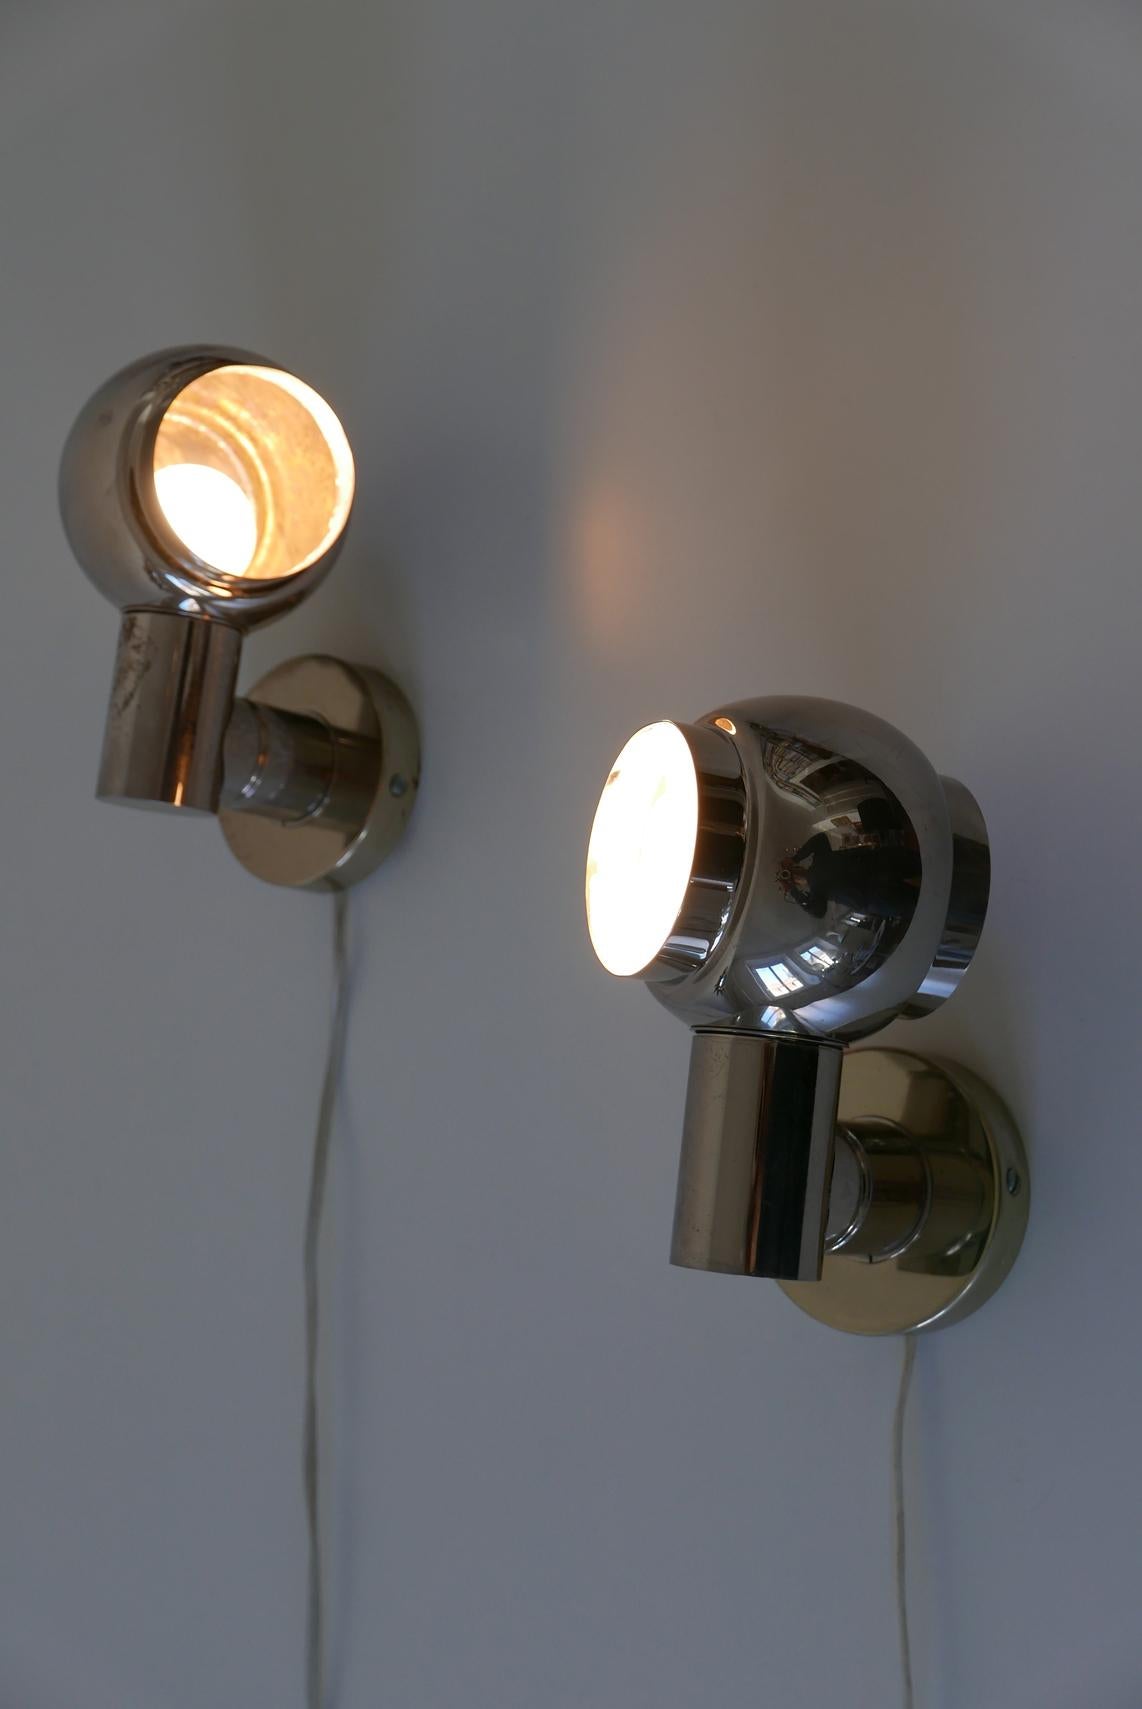 Set of Two Mid-Century Modern Wall Lamps or Sconces, 1960s, Germany For Sale 3